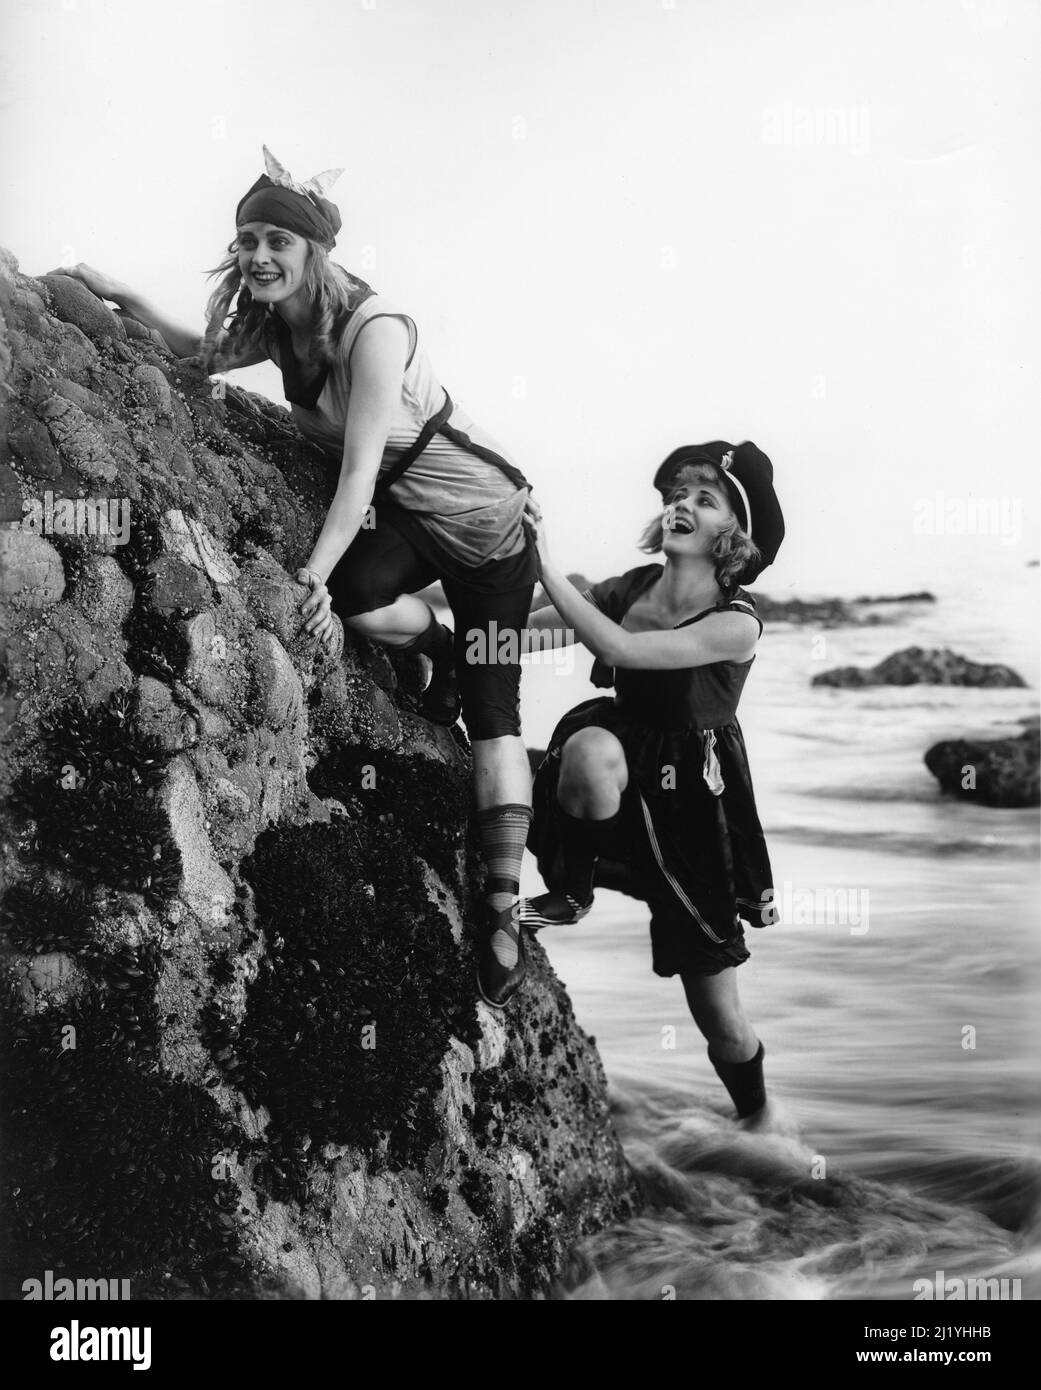 Two women in 1920's attire on the beach climbing on the rocks at the beach Stock Photo